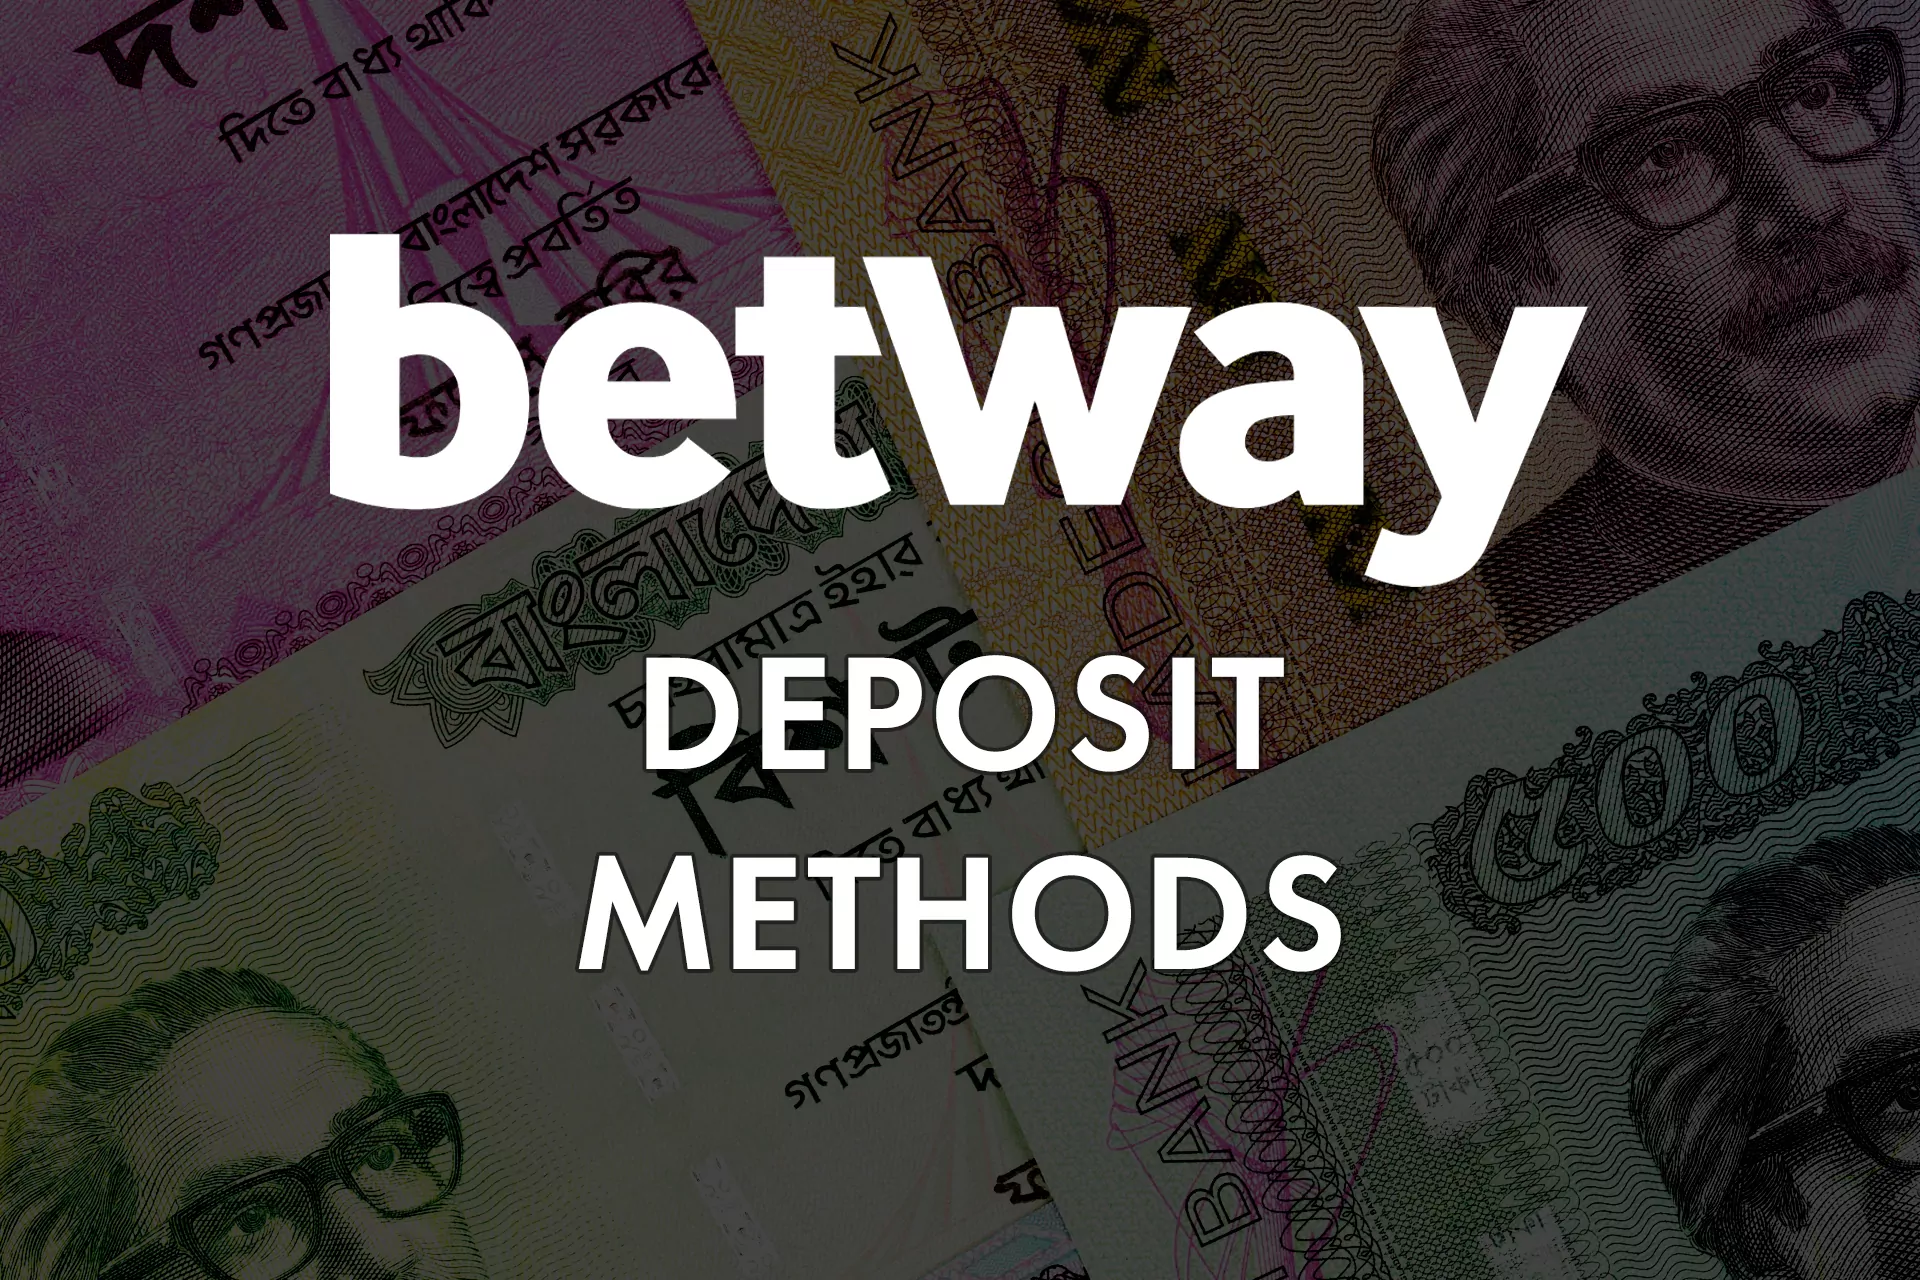 Use bank cards and international e-wallets to deposit to your betting account at Betway.